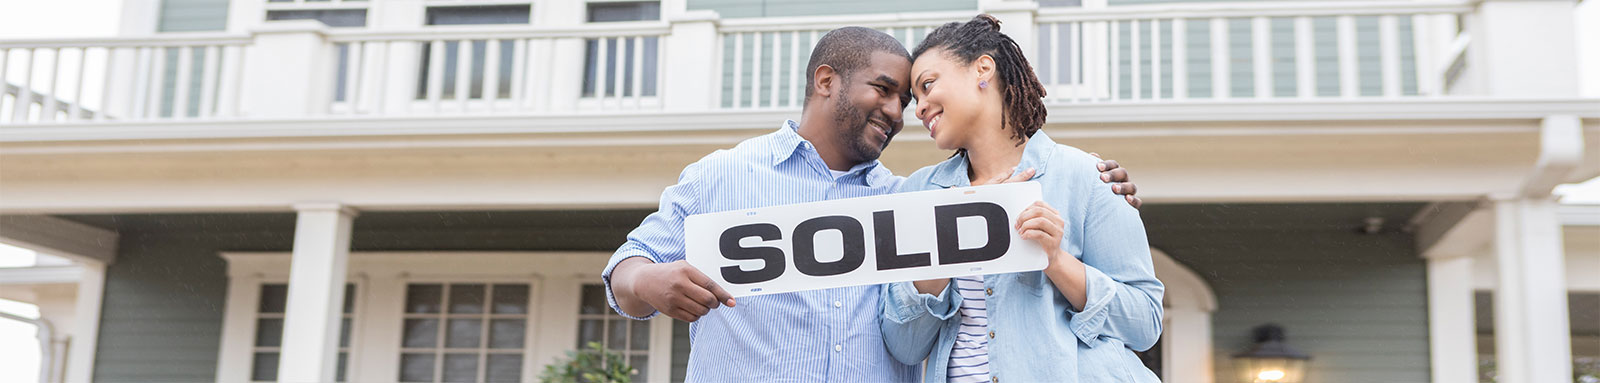 Couple holding sold sign in front of their home